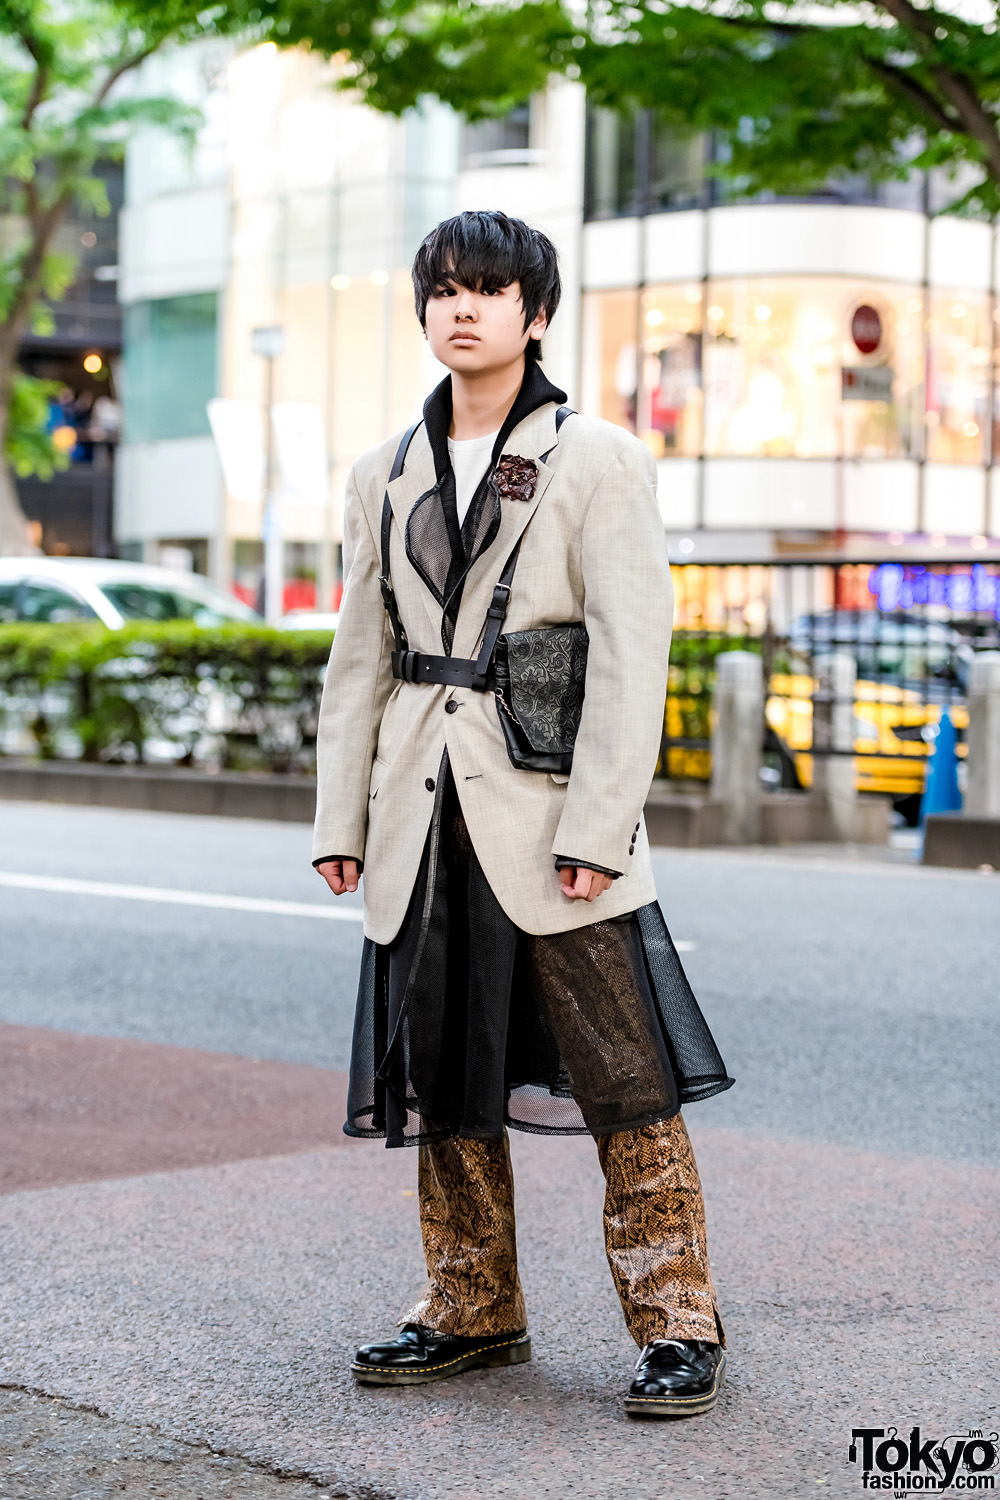 Japanese Streetwear Style w/ Valentino Blazer, Structured Mesh Coat, Snakeskin Pants, Dr. Martens Boots, Leather Harness & Waist Bag